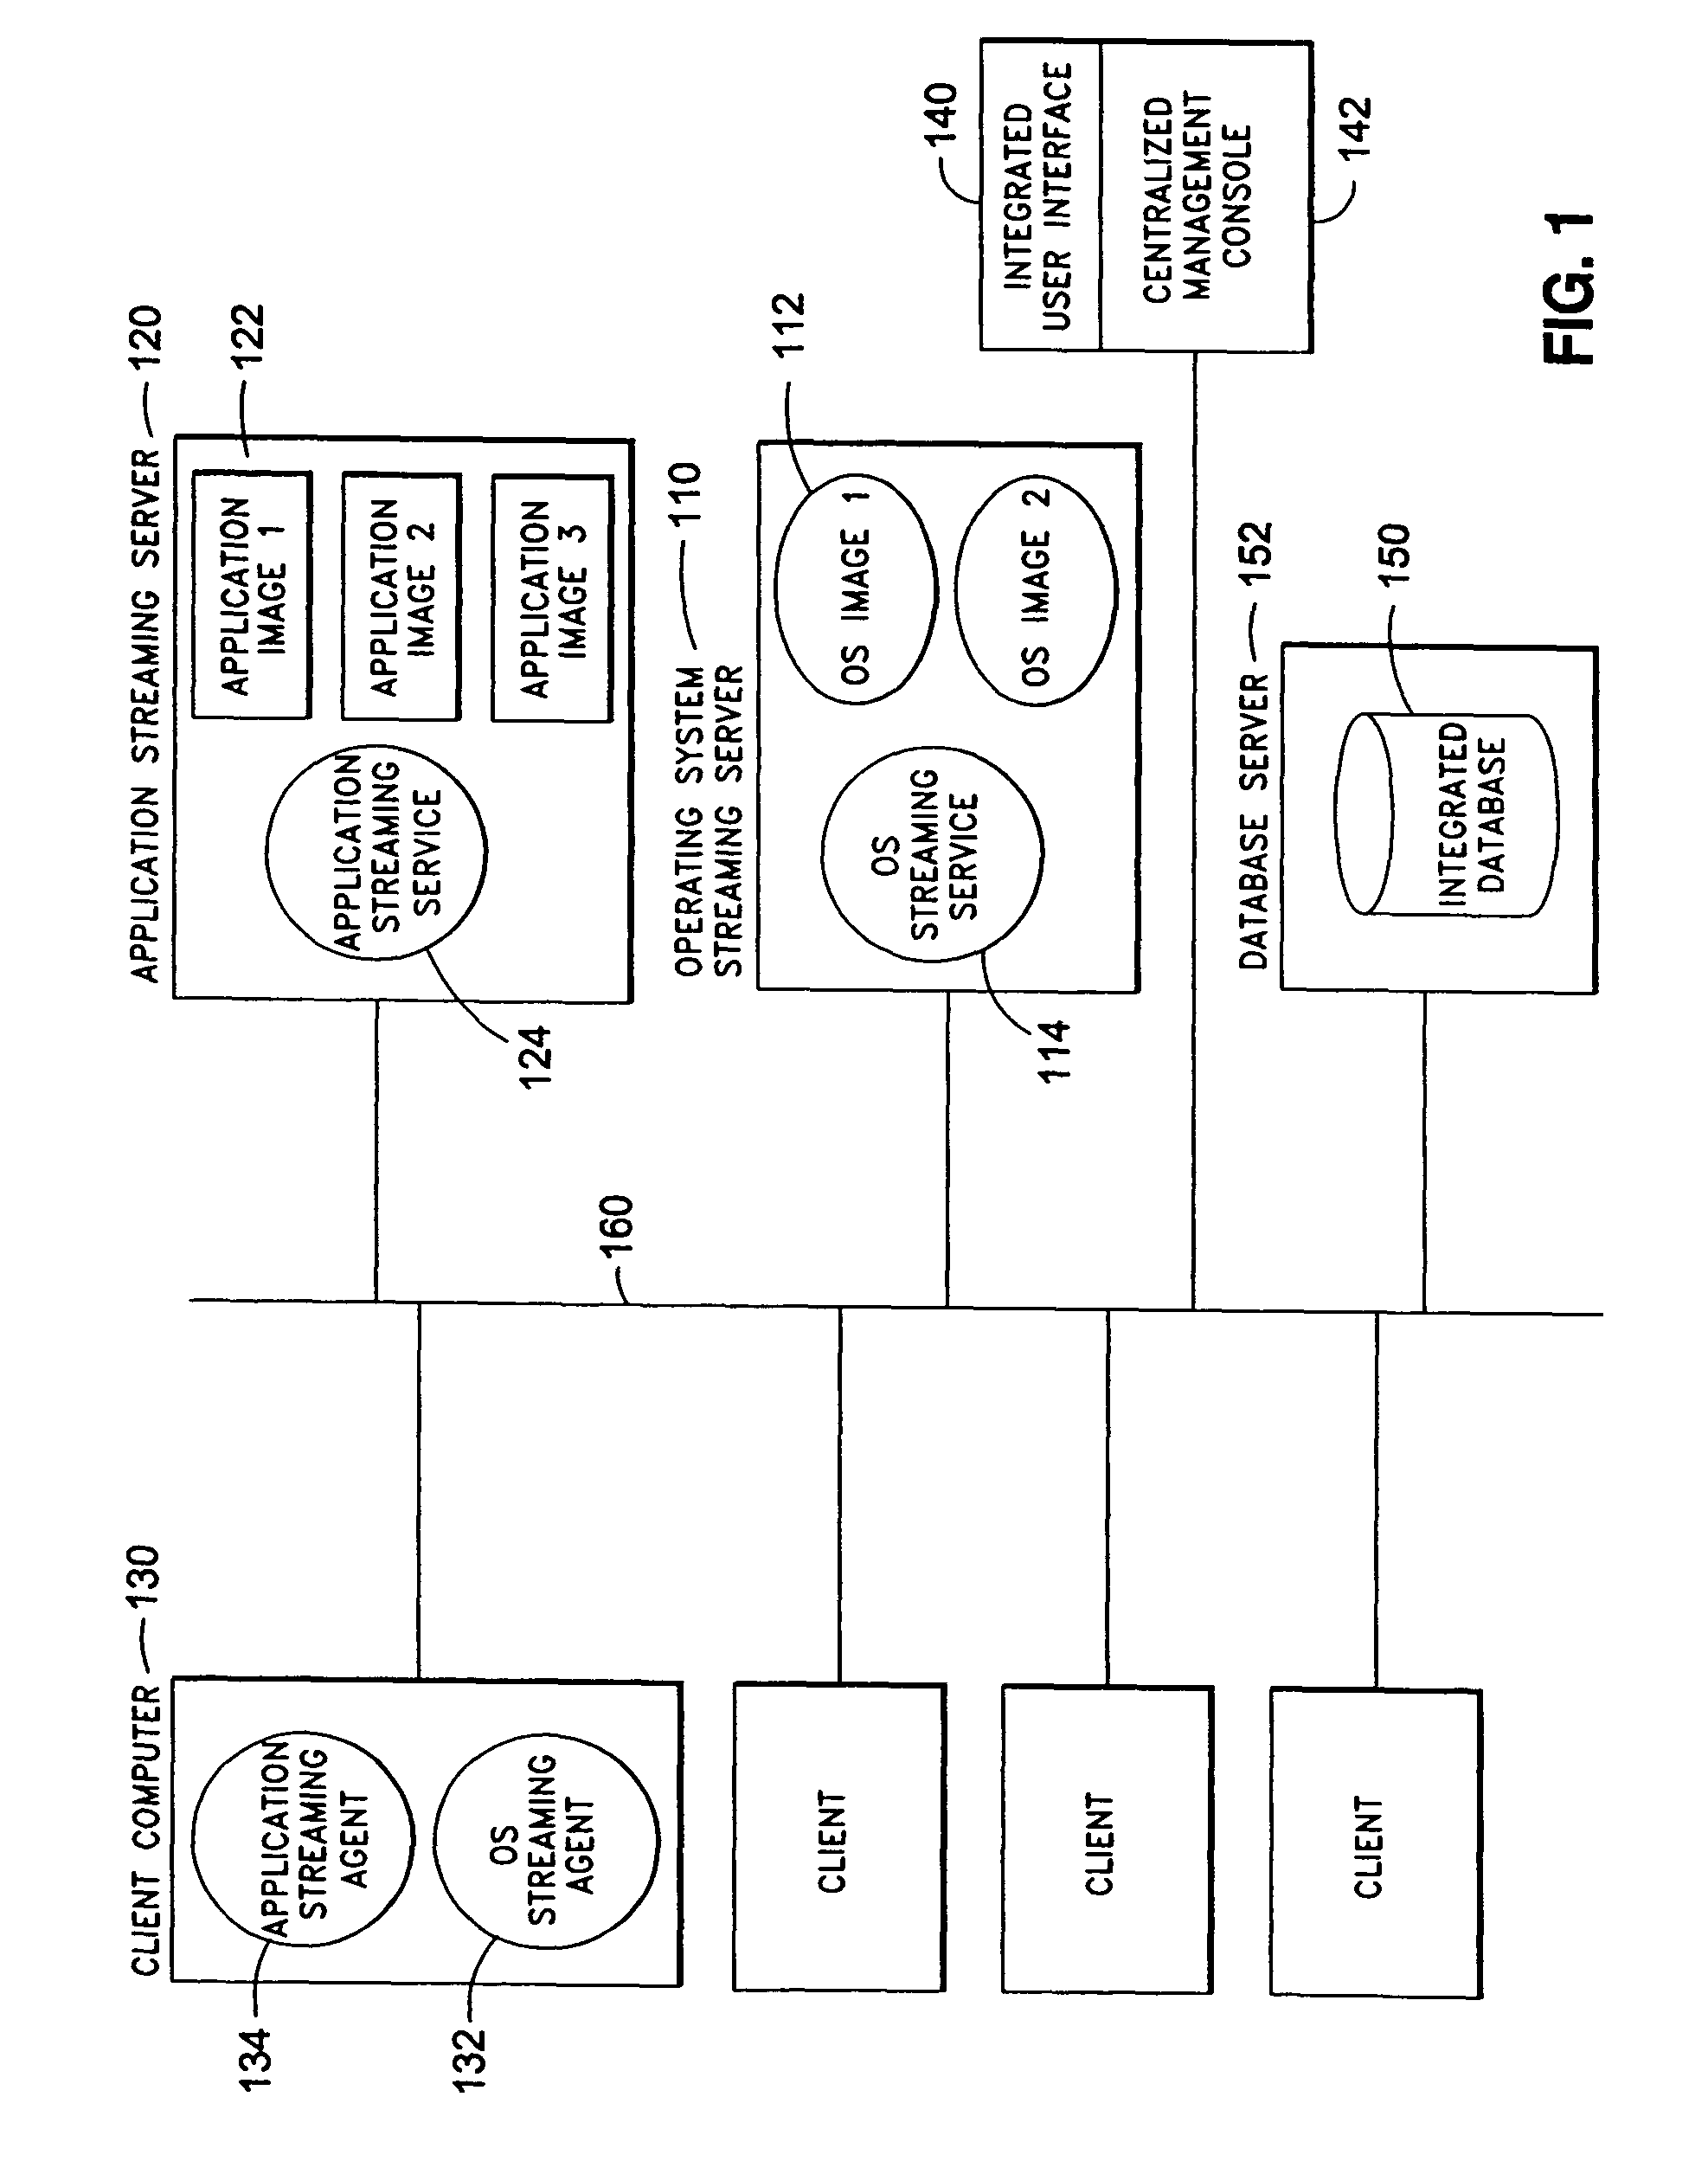 System and method for integrated on-demand delivery of operating system and applications